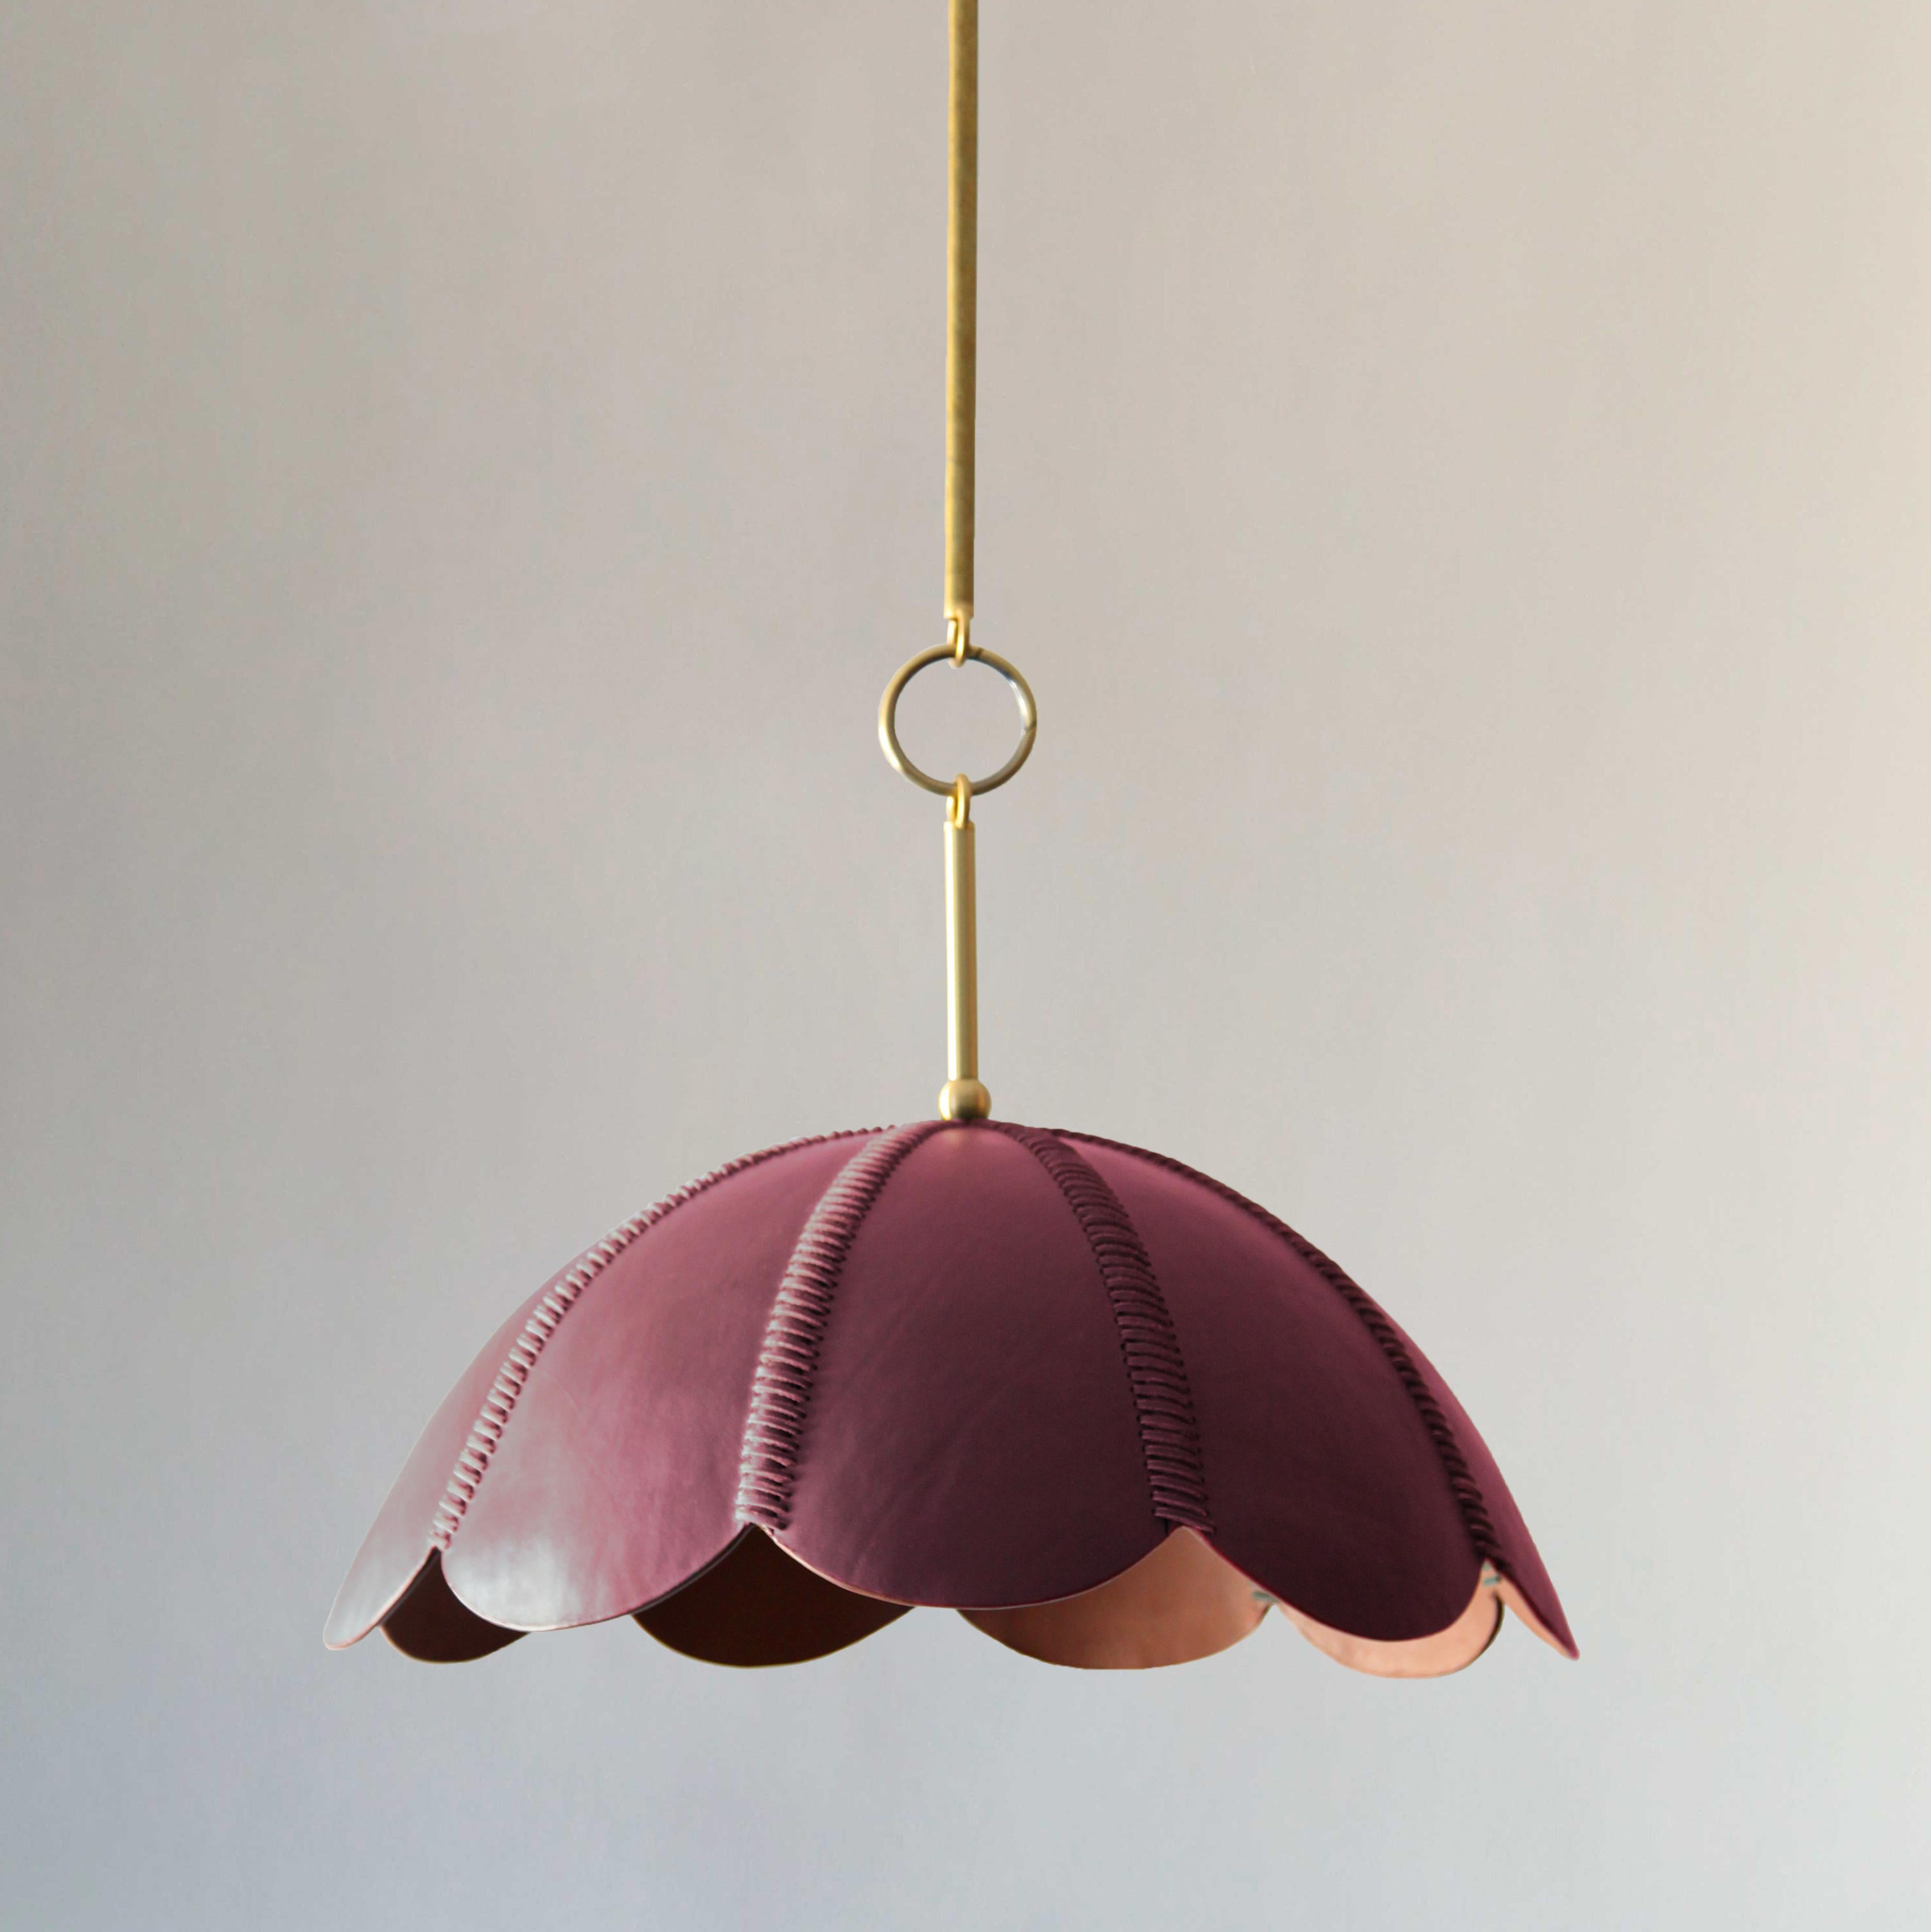 The lamps in this collection are inspired by Colombia’s equestrian heritage, layered with a jewel-toned color palette that takes inspiration from the works of
Colombian artist Fernando Botero.

Talabartero translates as ‘master saddler,’ and the